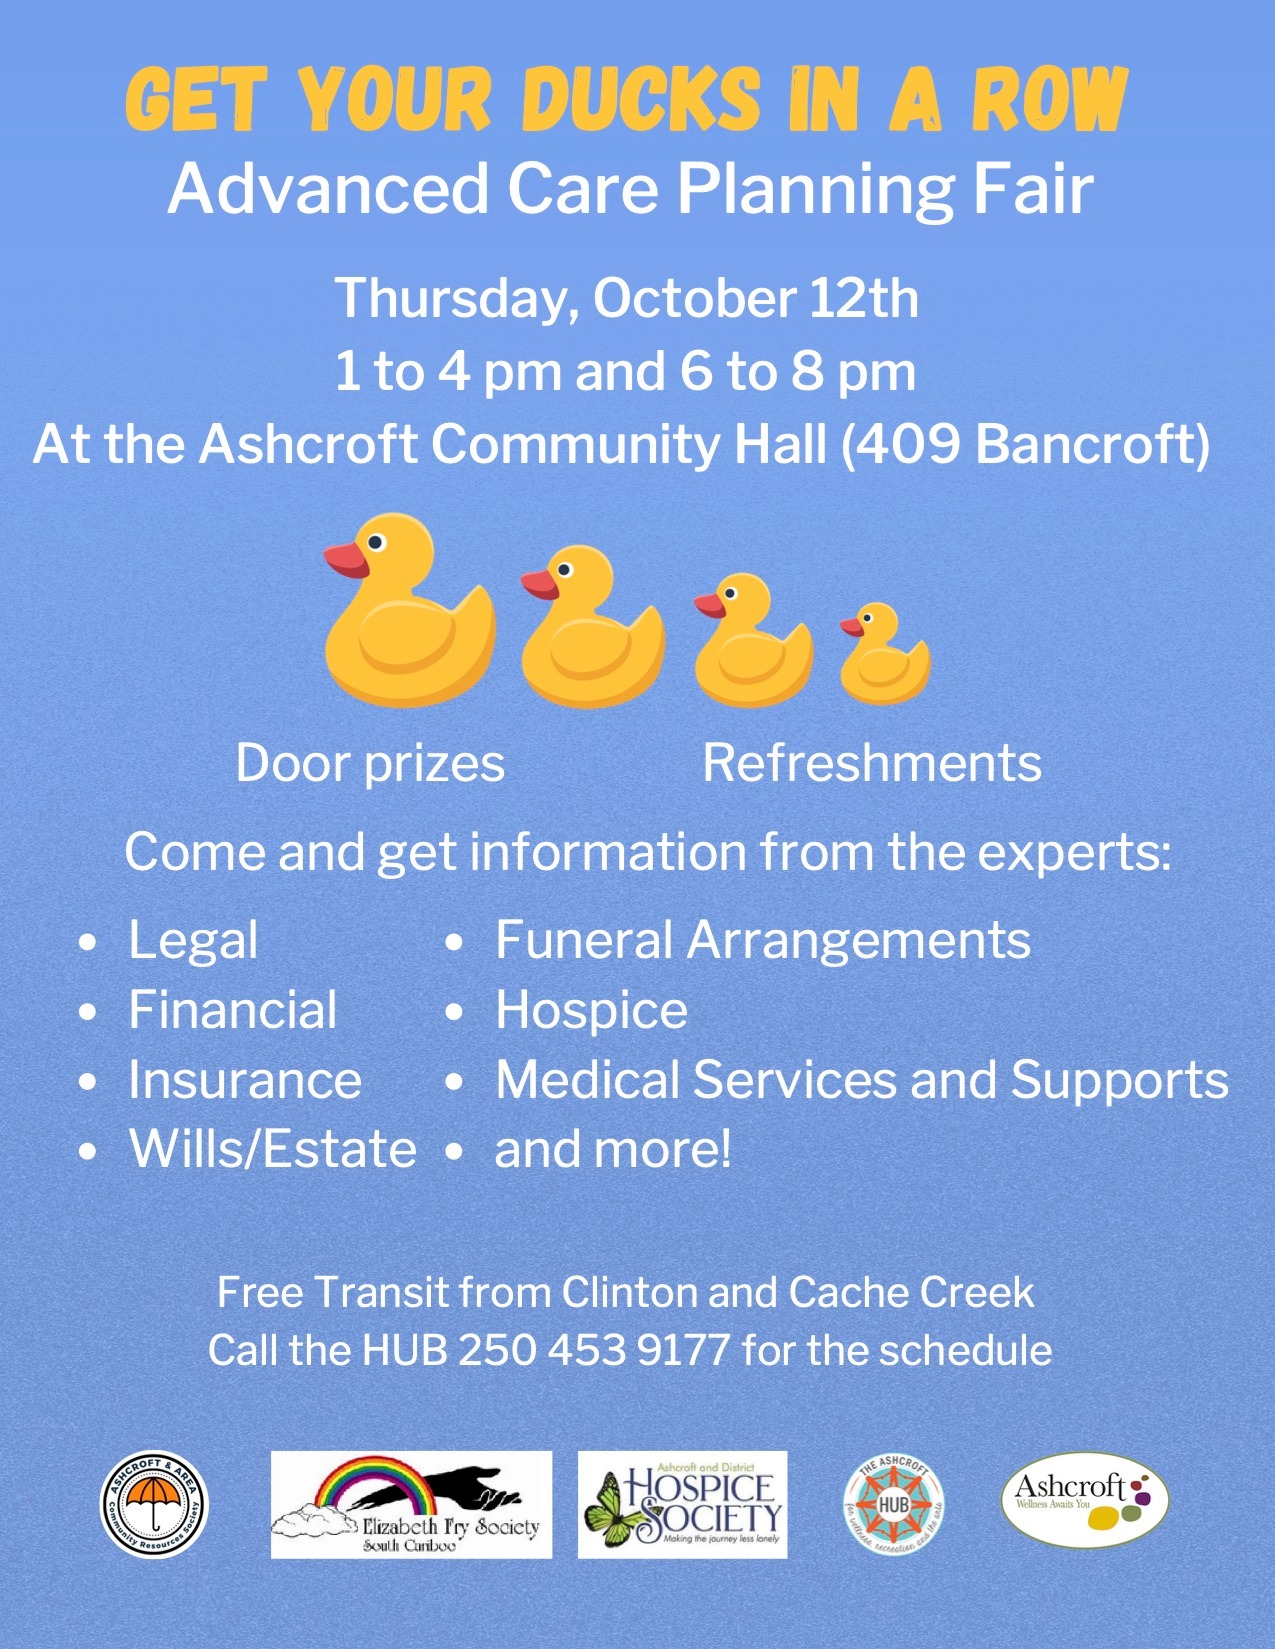 Get Your Ducks in a Row:  Advance Care Planning Fair